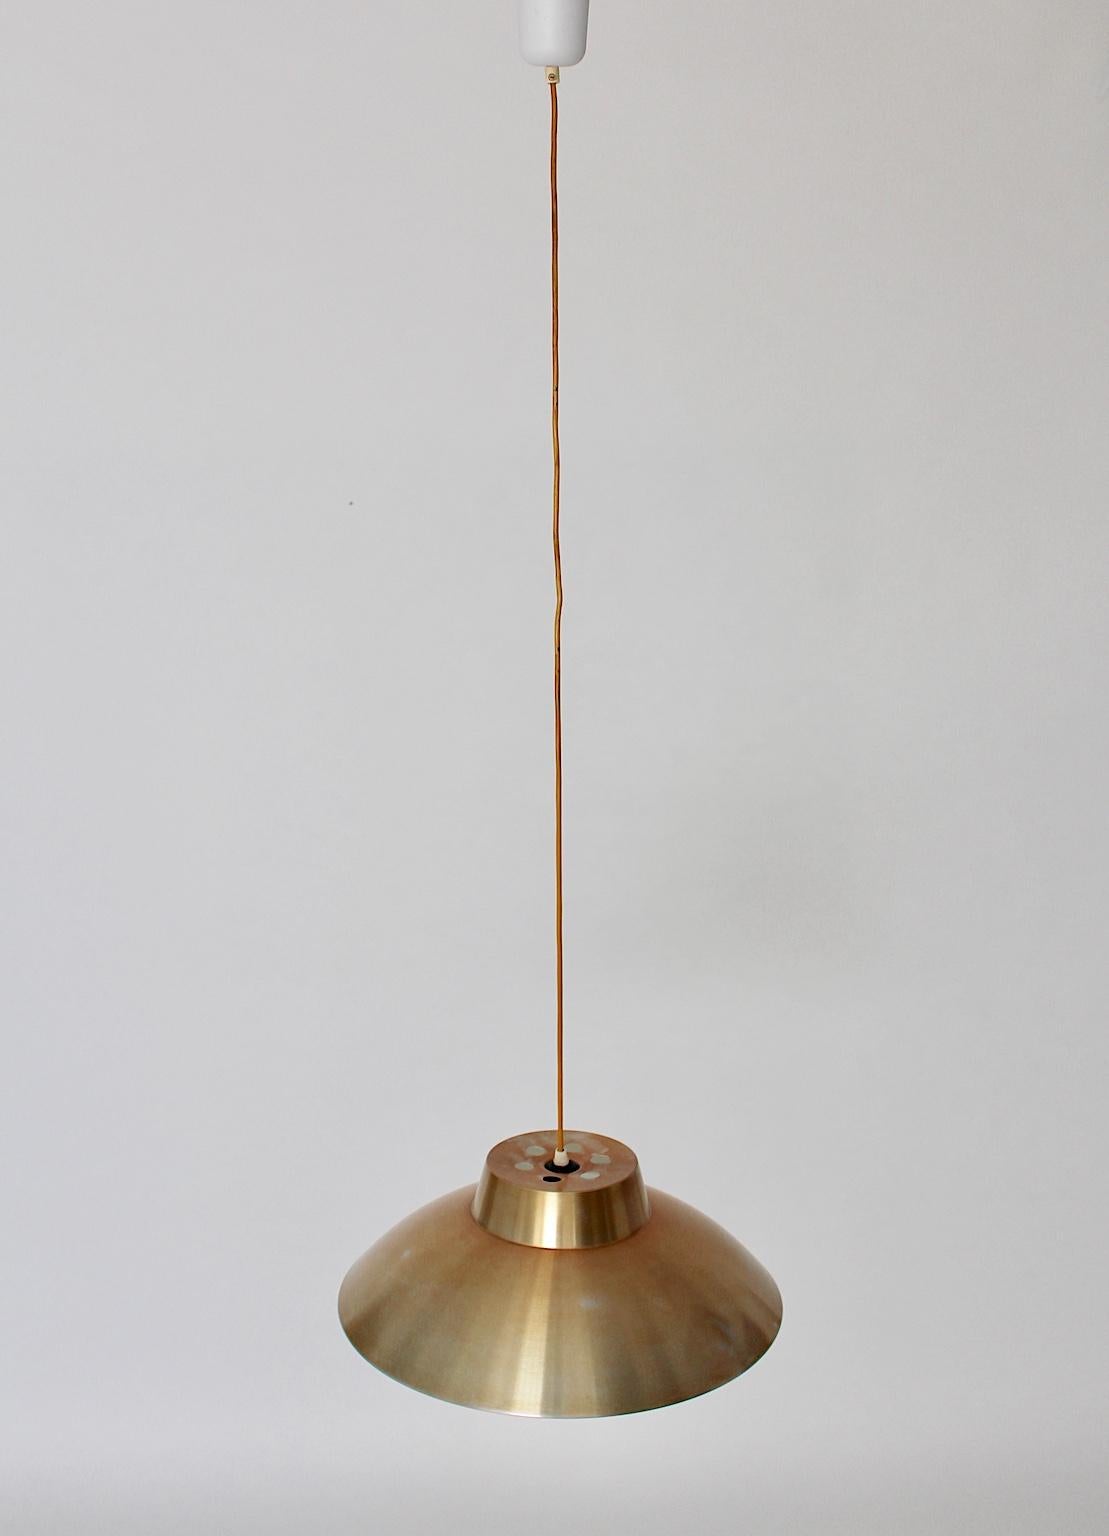 Mid Century Modern vintage pendant or hanging lamp by Philips Netherlands, which was designed in the 1960s.
The good looking aluminum lamp shade shows a golden eloxated surface, while the form features a wonderful calm stylish design.
The vintage